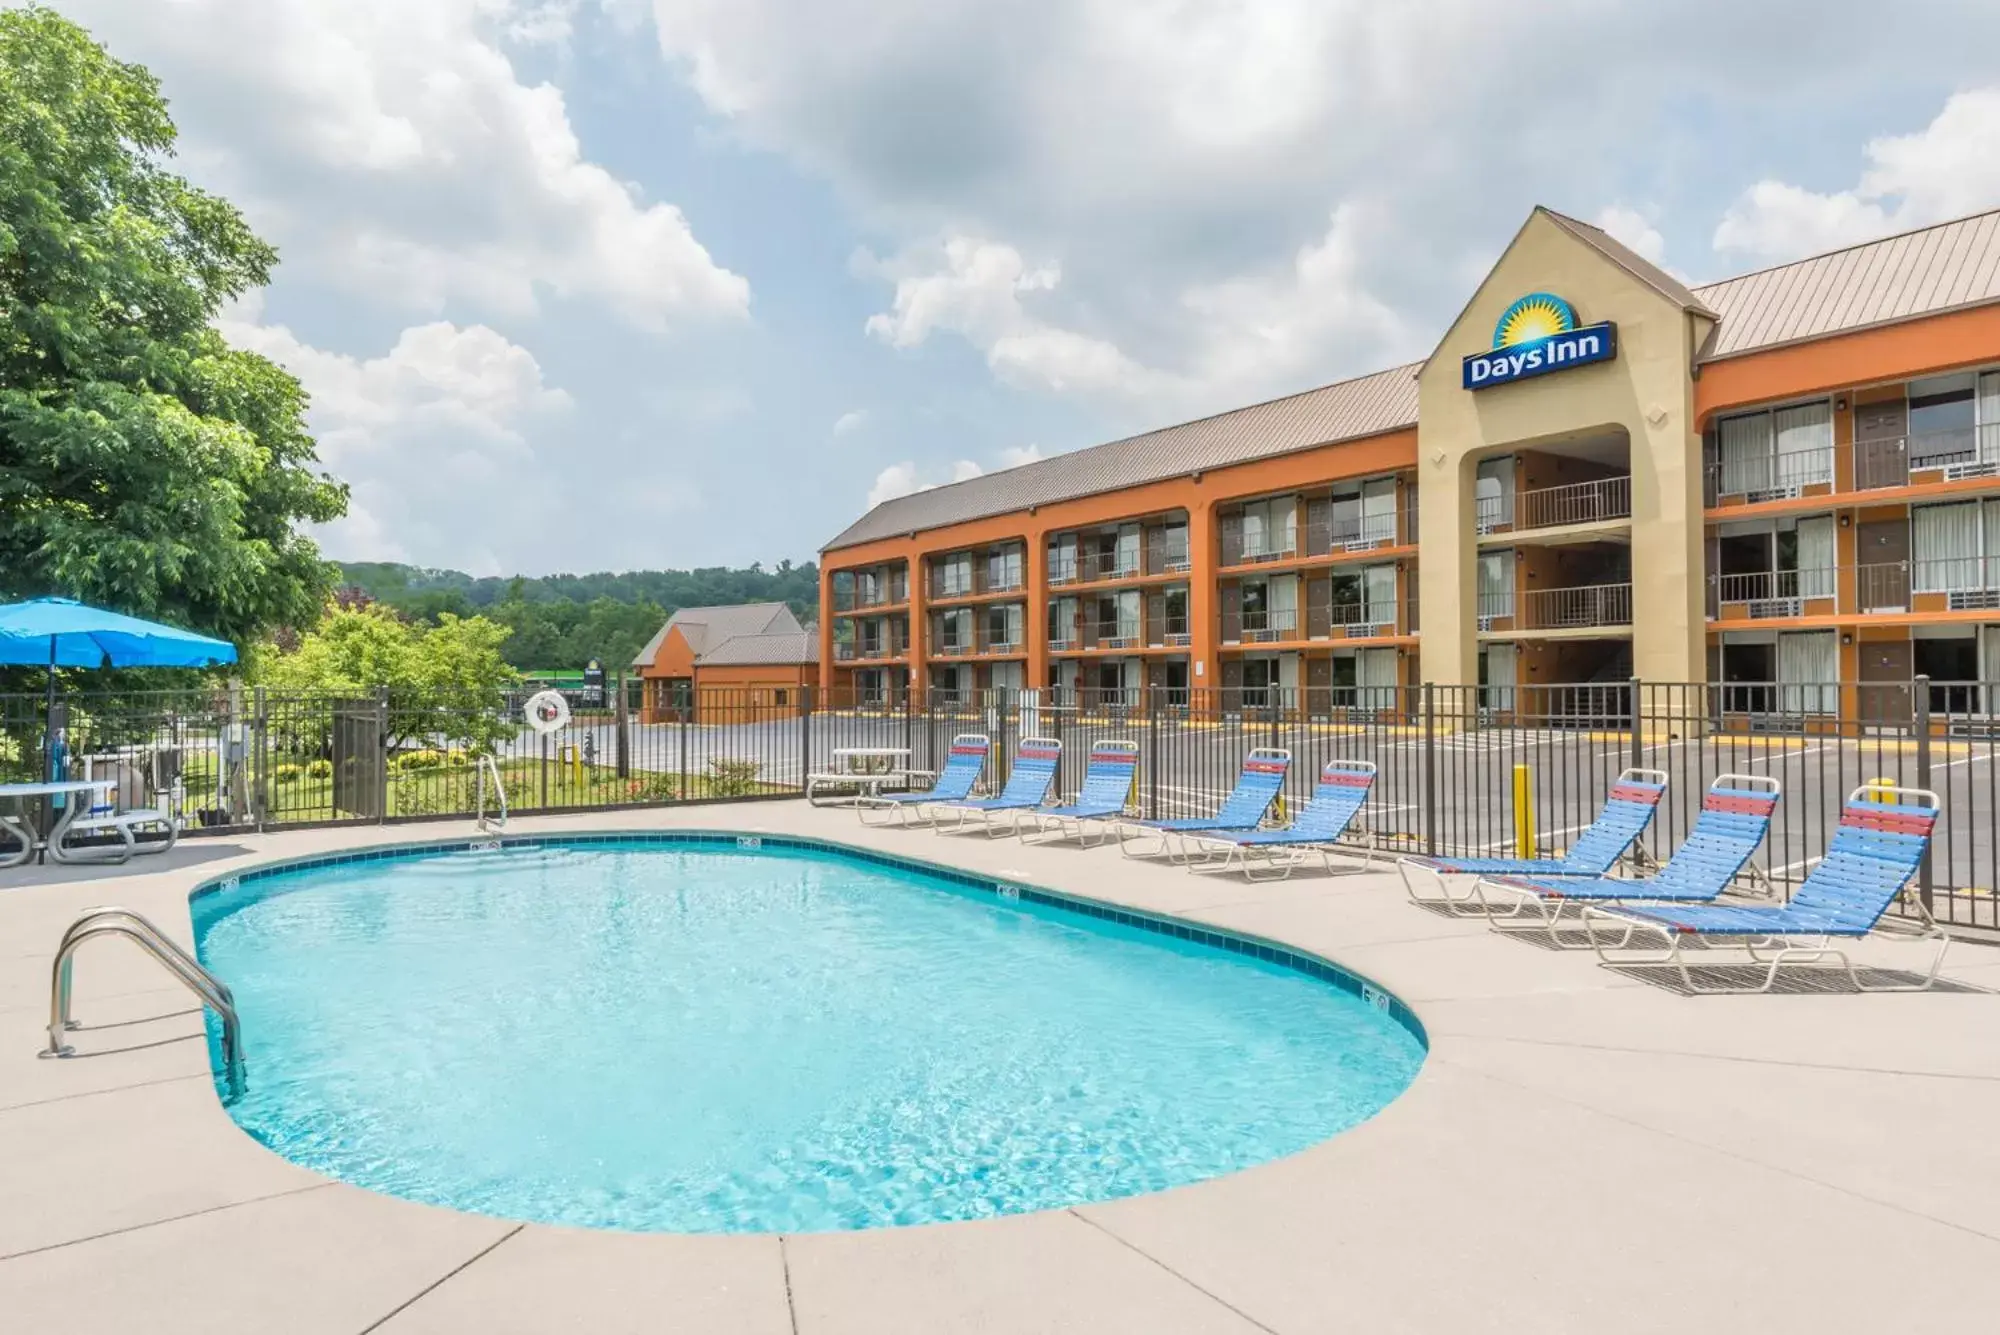 Swimming pool, Property Building in Days Inn by Wyndham Knoxville East